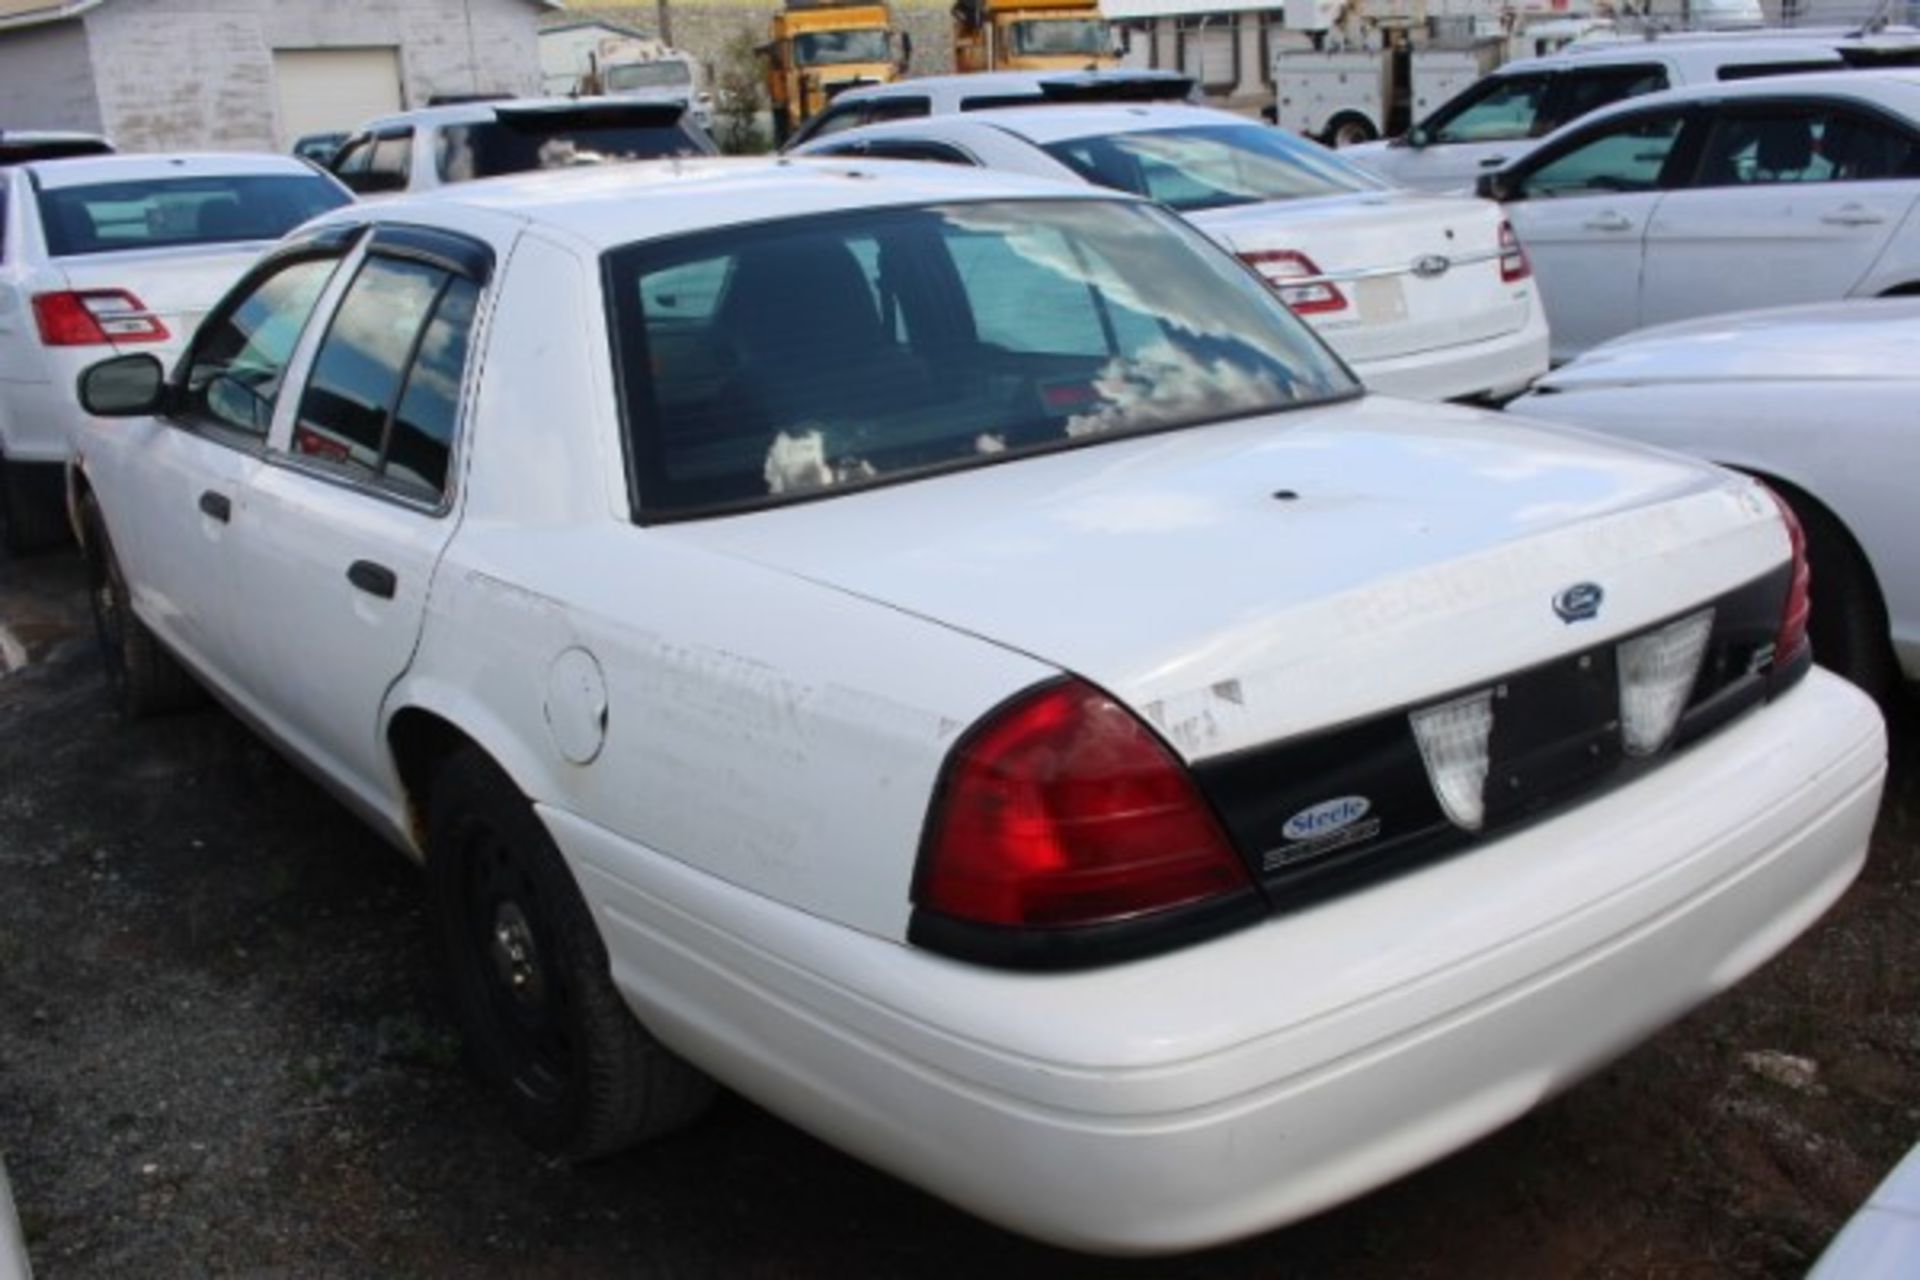 2011 Ford Crown Vic - Image 4 of 6